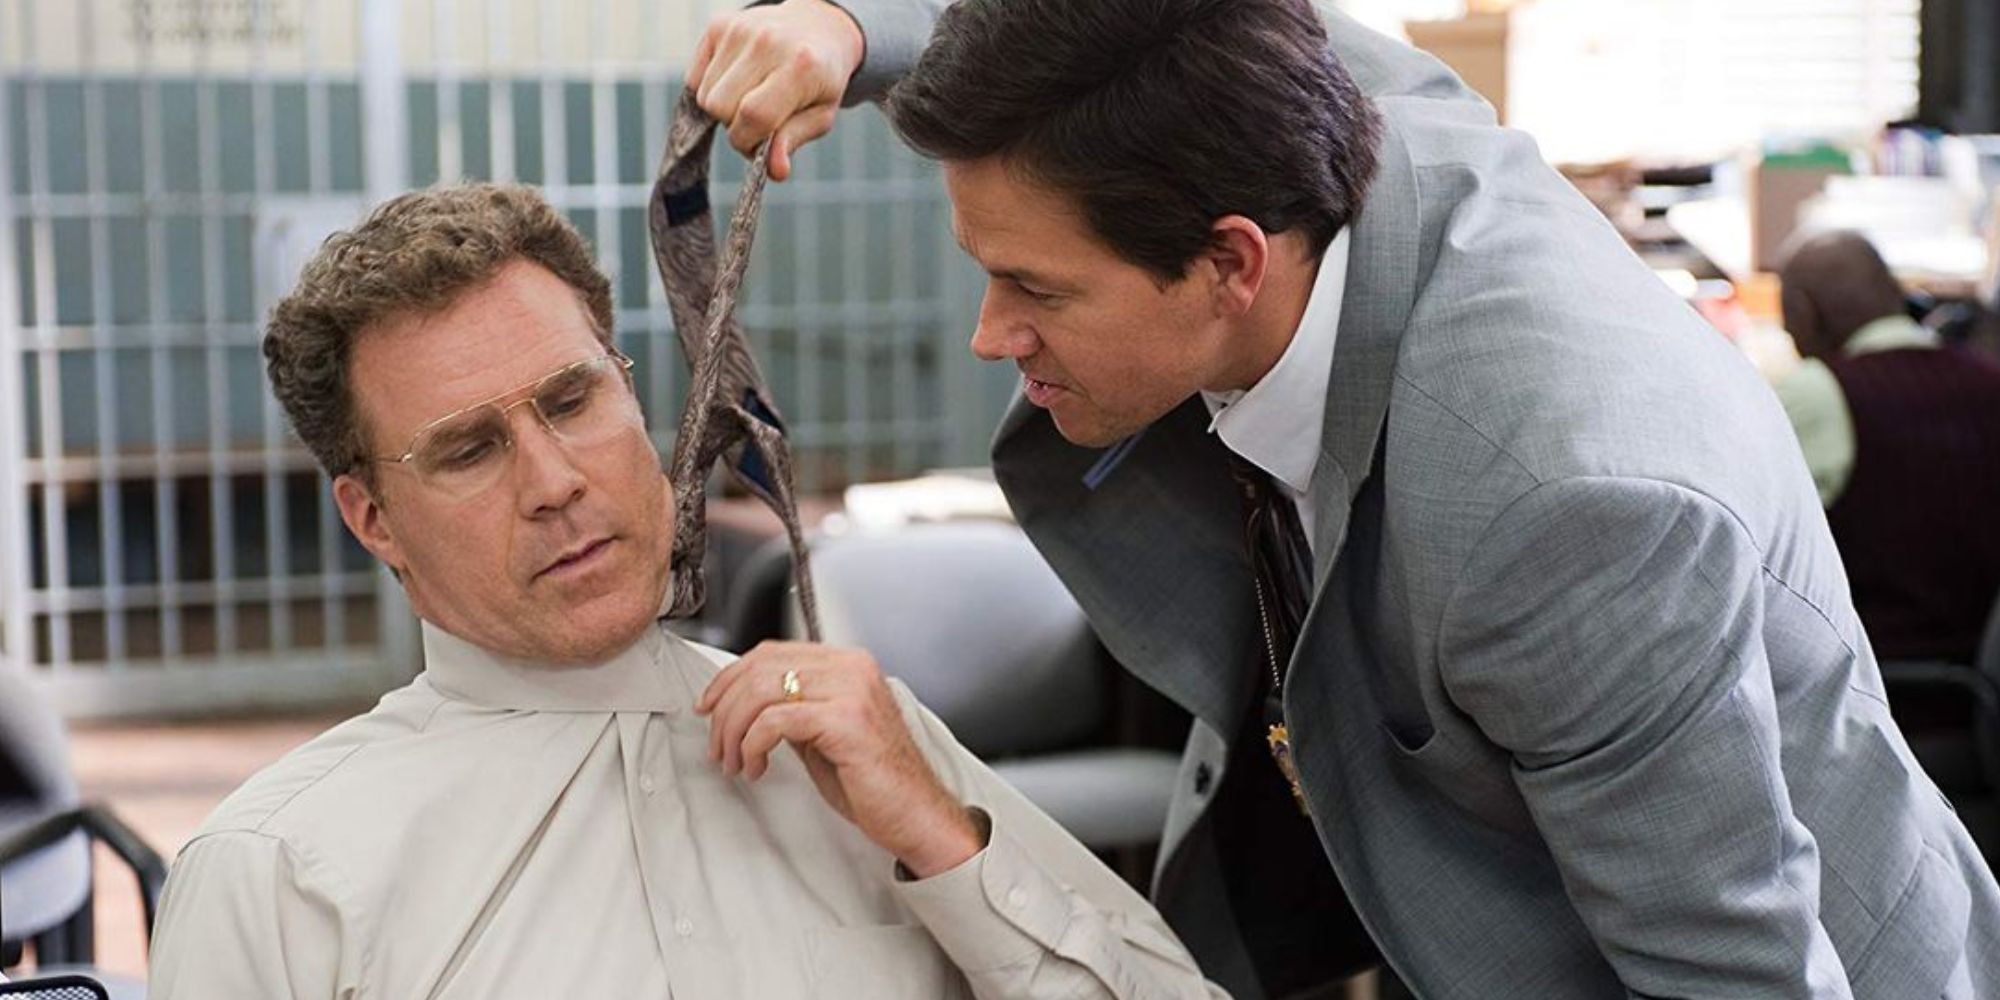 Will Ferrell as Allen Gamble having his tie pulled by Mark Wahlberg as Terry Hoitz in The Other Guys